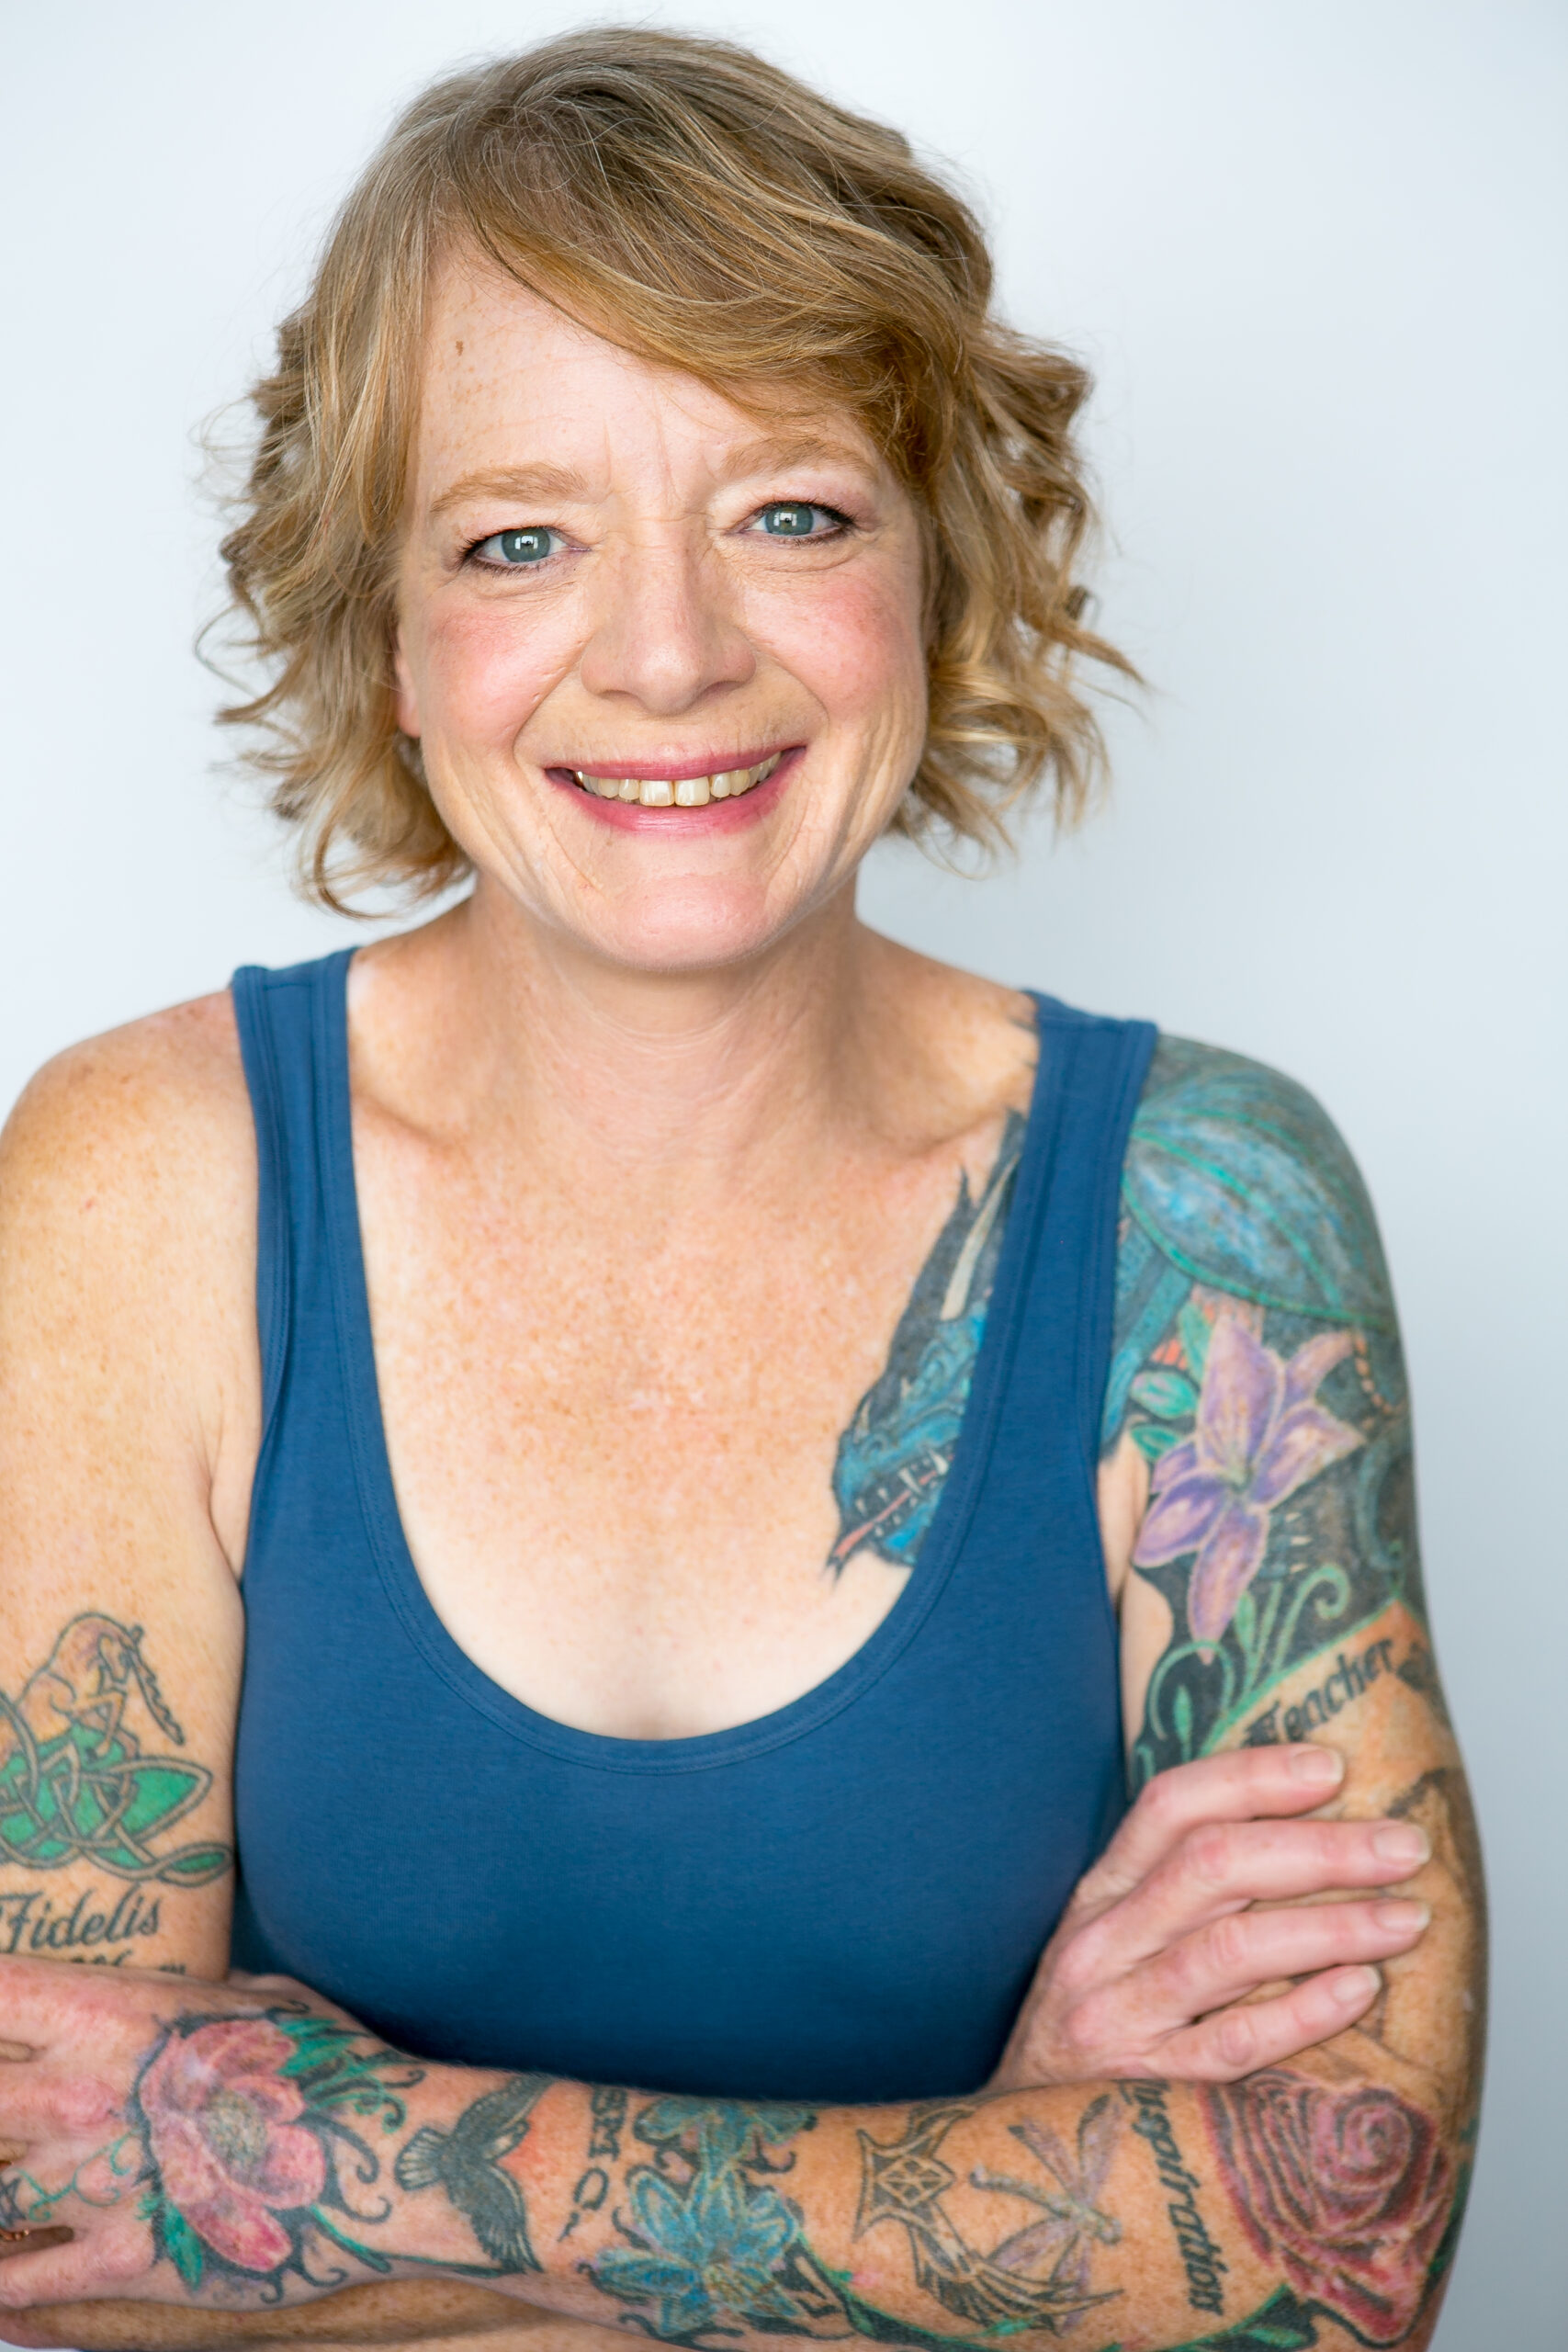 Gwyn is a middle aged woman with chin-length red hair and blue eyes. She is wearing a blue tank top that shows tattoos covering her left arm with smaller tattoos on her upper right arm and is standing with her arms crossed in front of her.